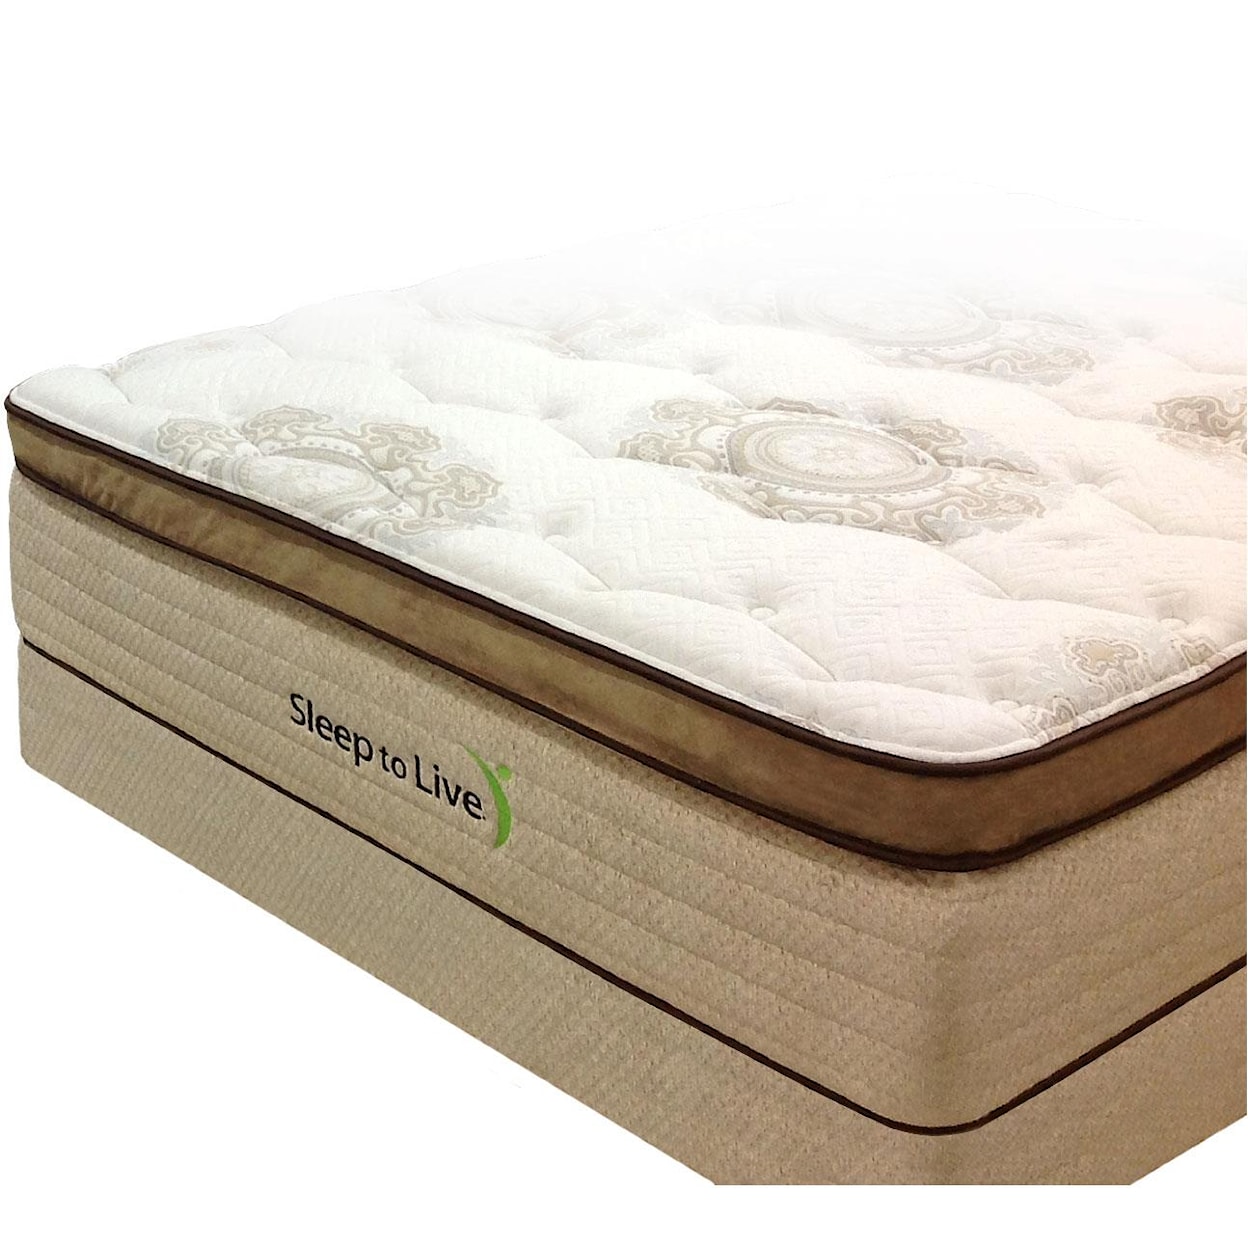 Kingsdown Body System 4 Queen Pocketed Coil Mattress